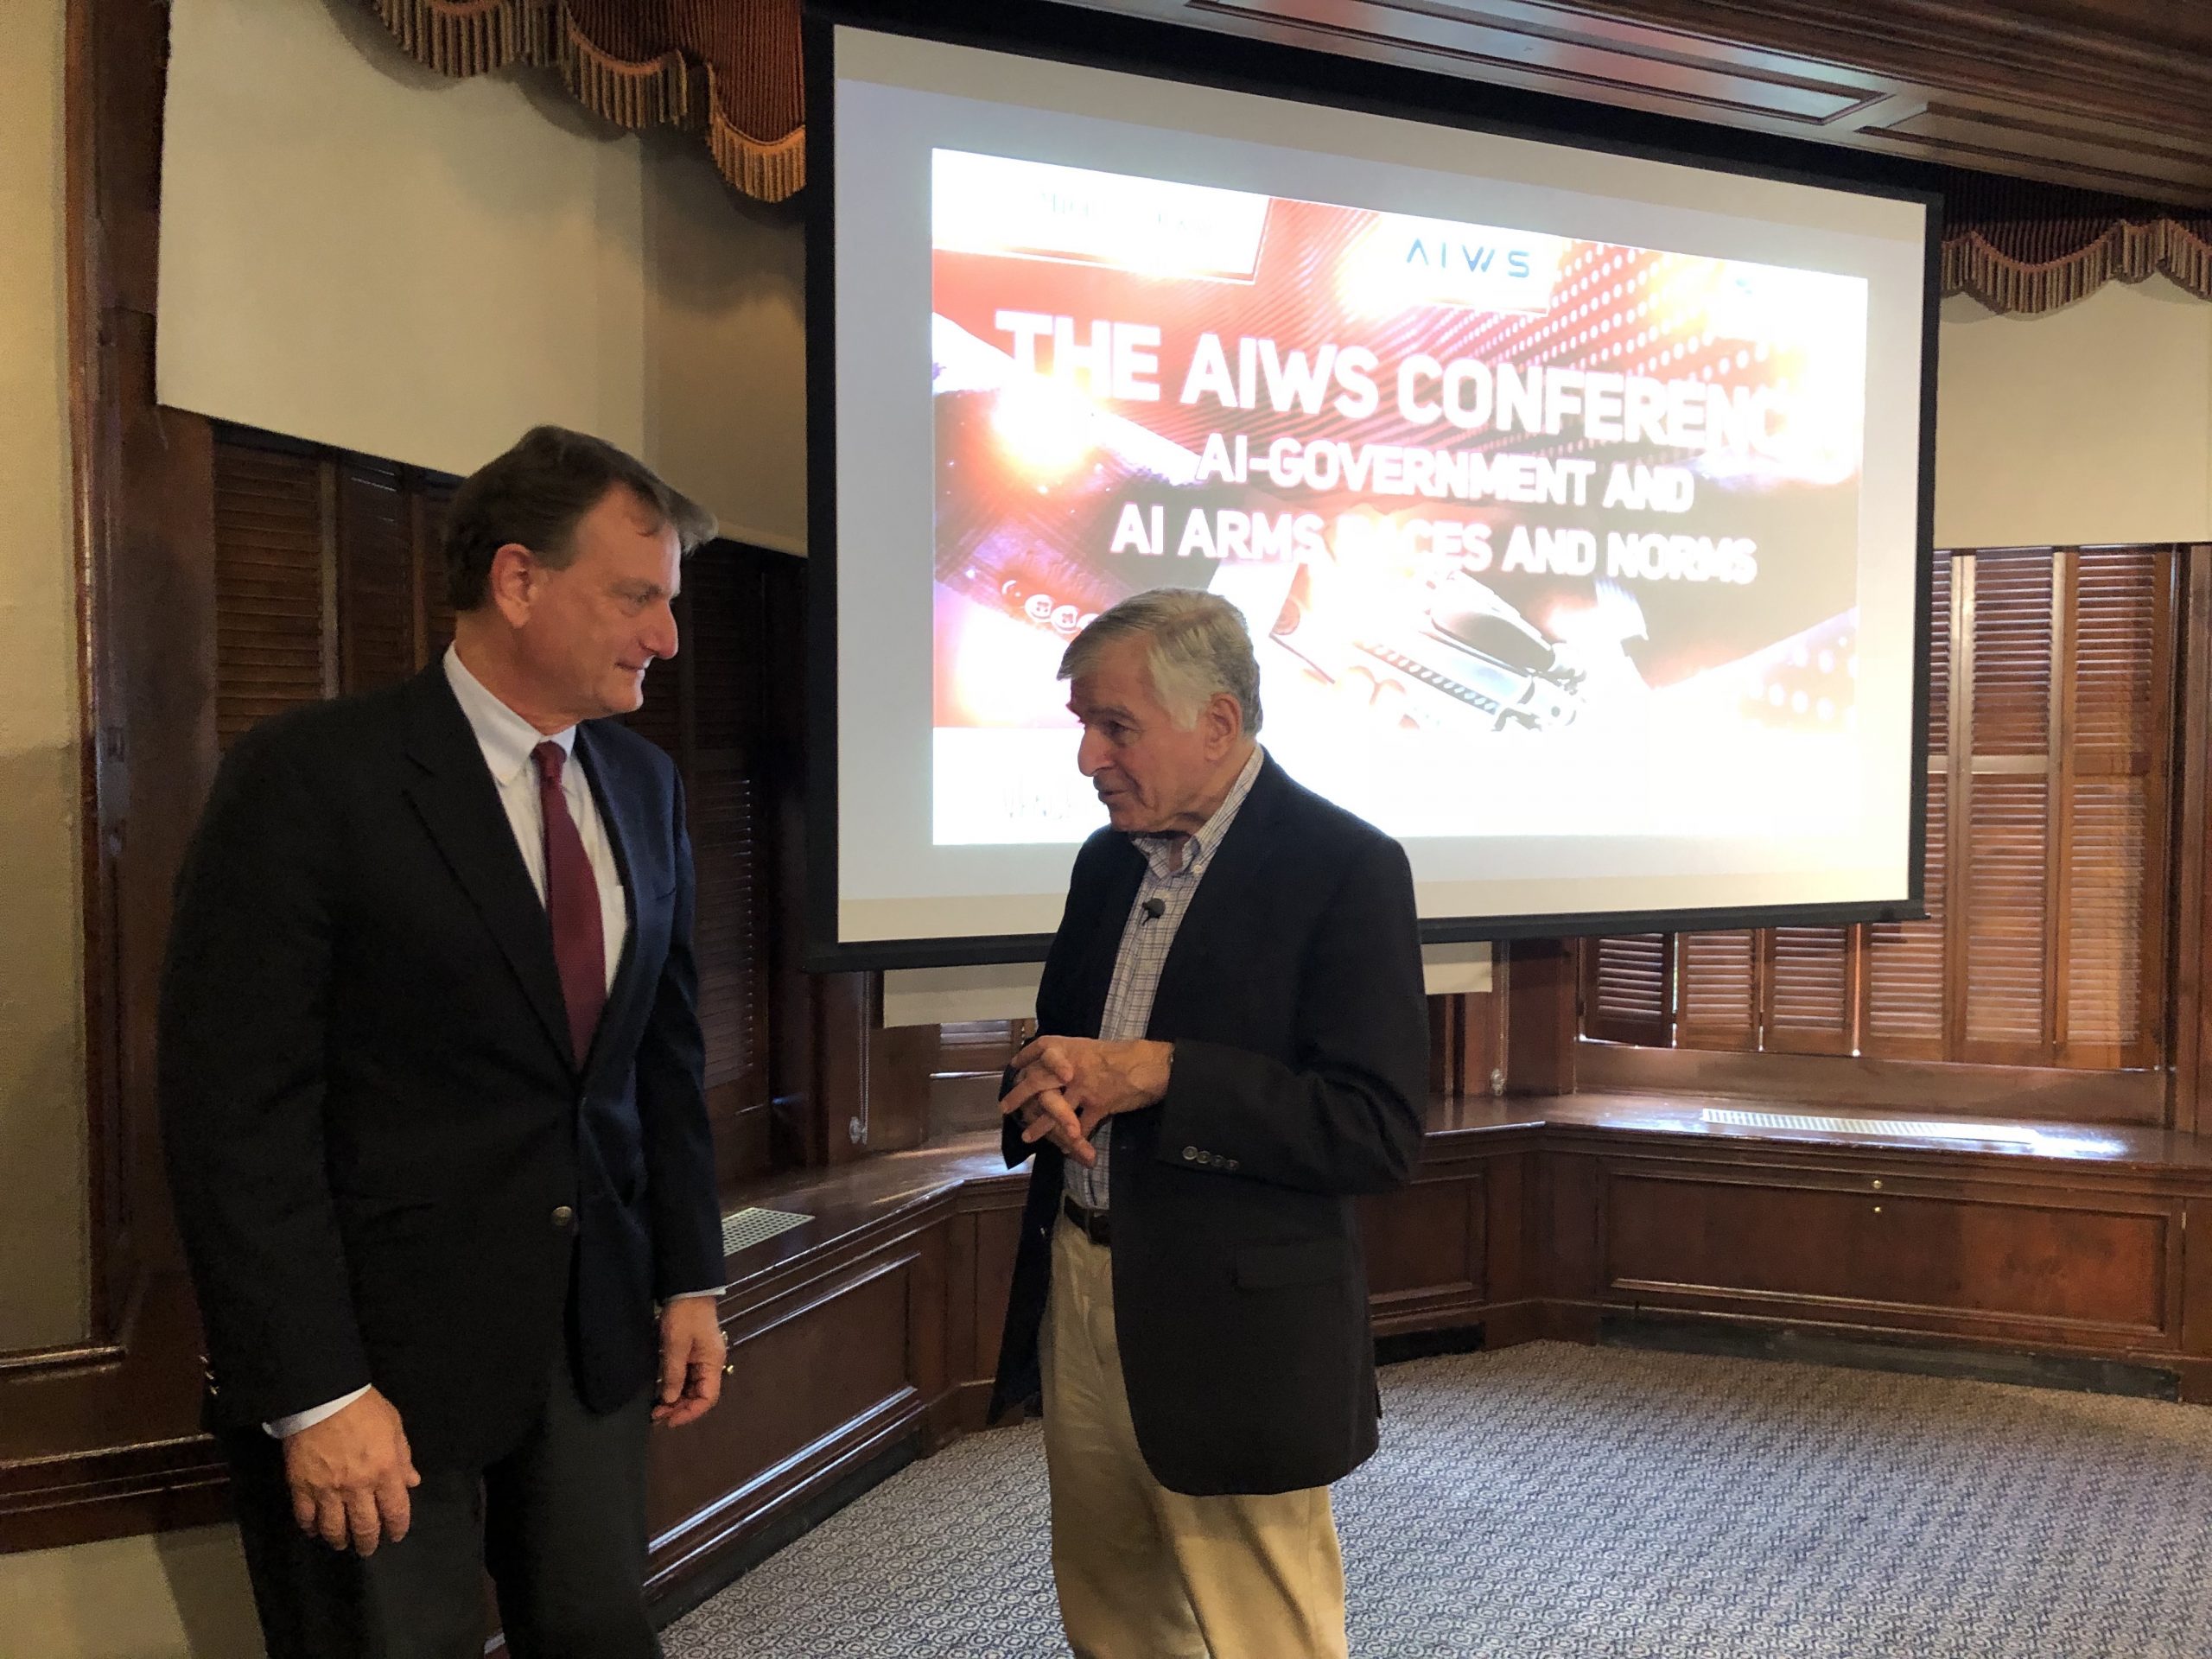 Marc Rotenberg Joins the Michael Dukakis Institute to Launch New Center on AI Policy